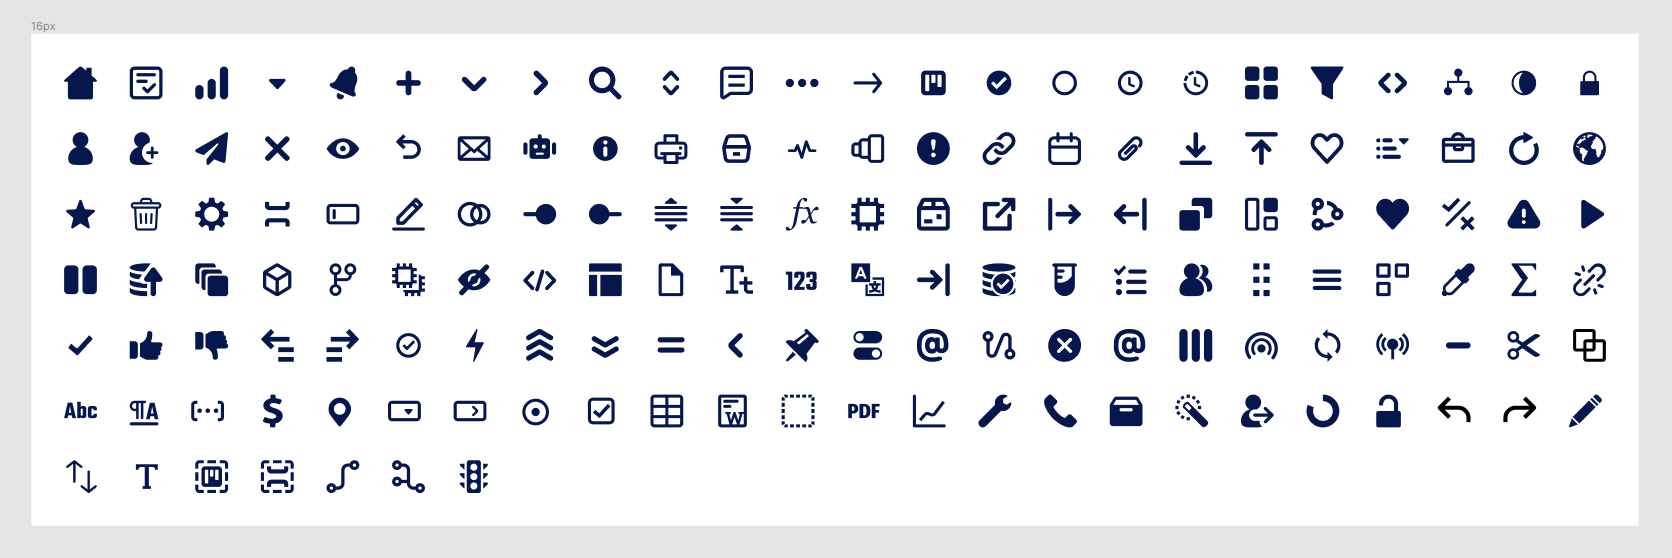 Figma canvas containing icons